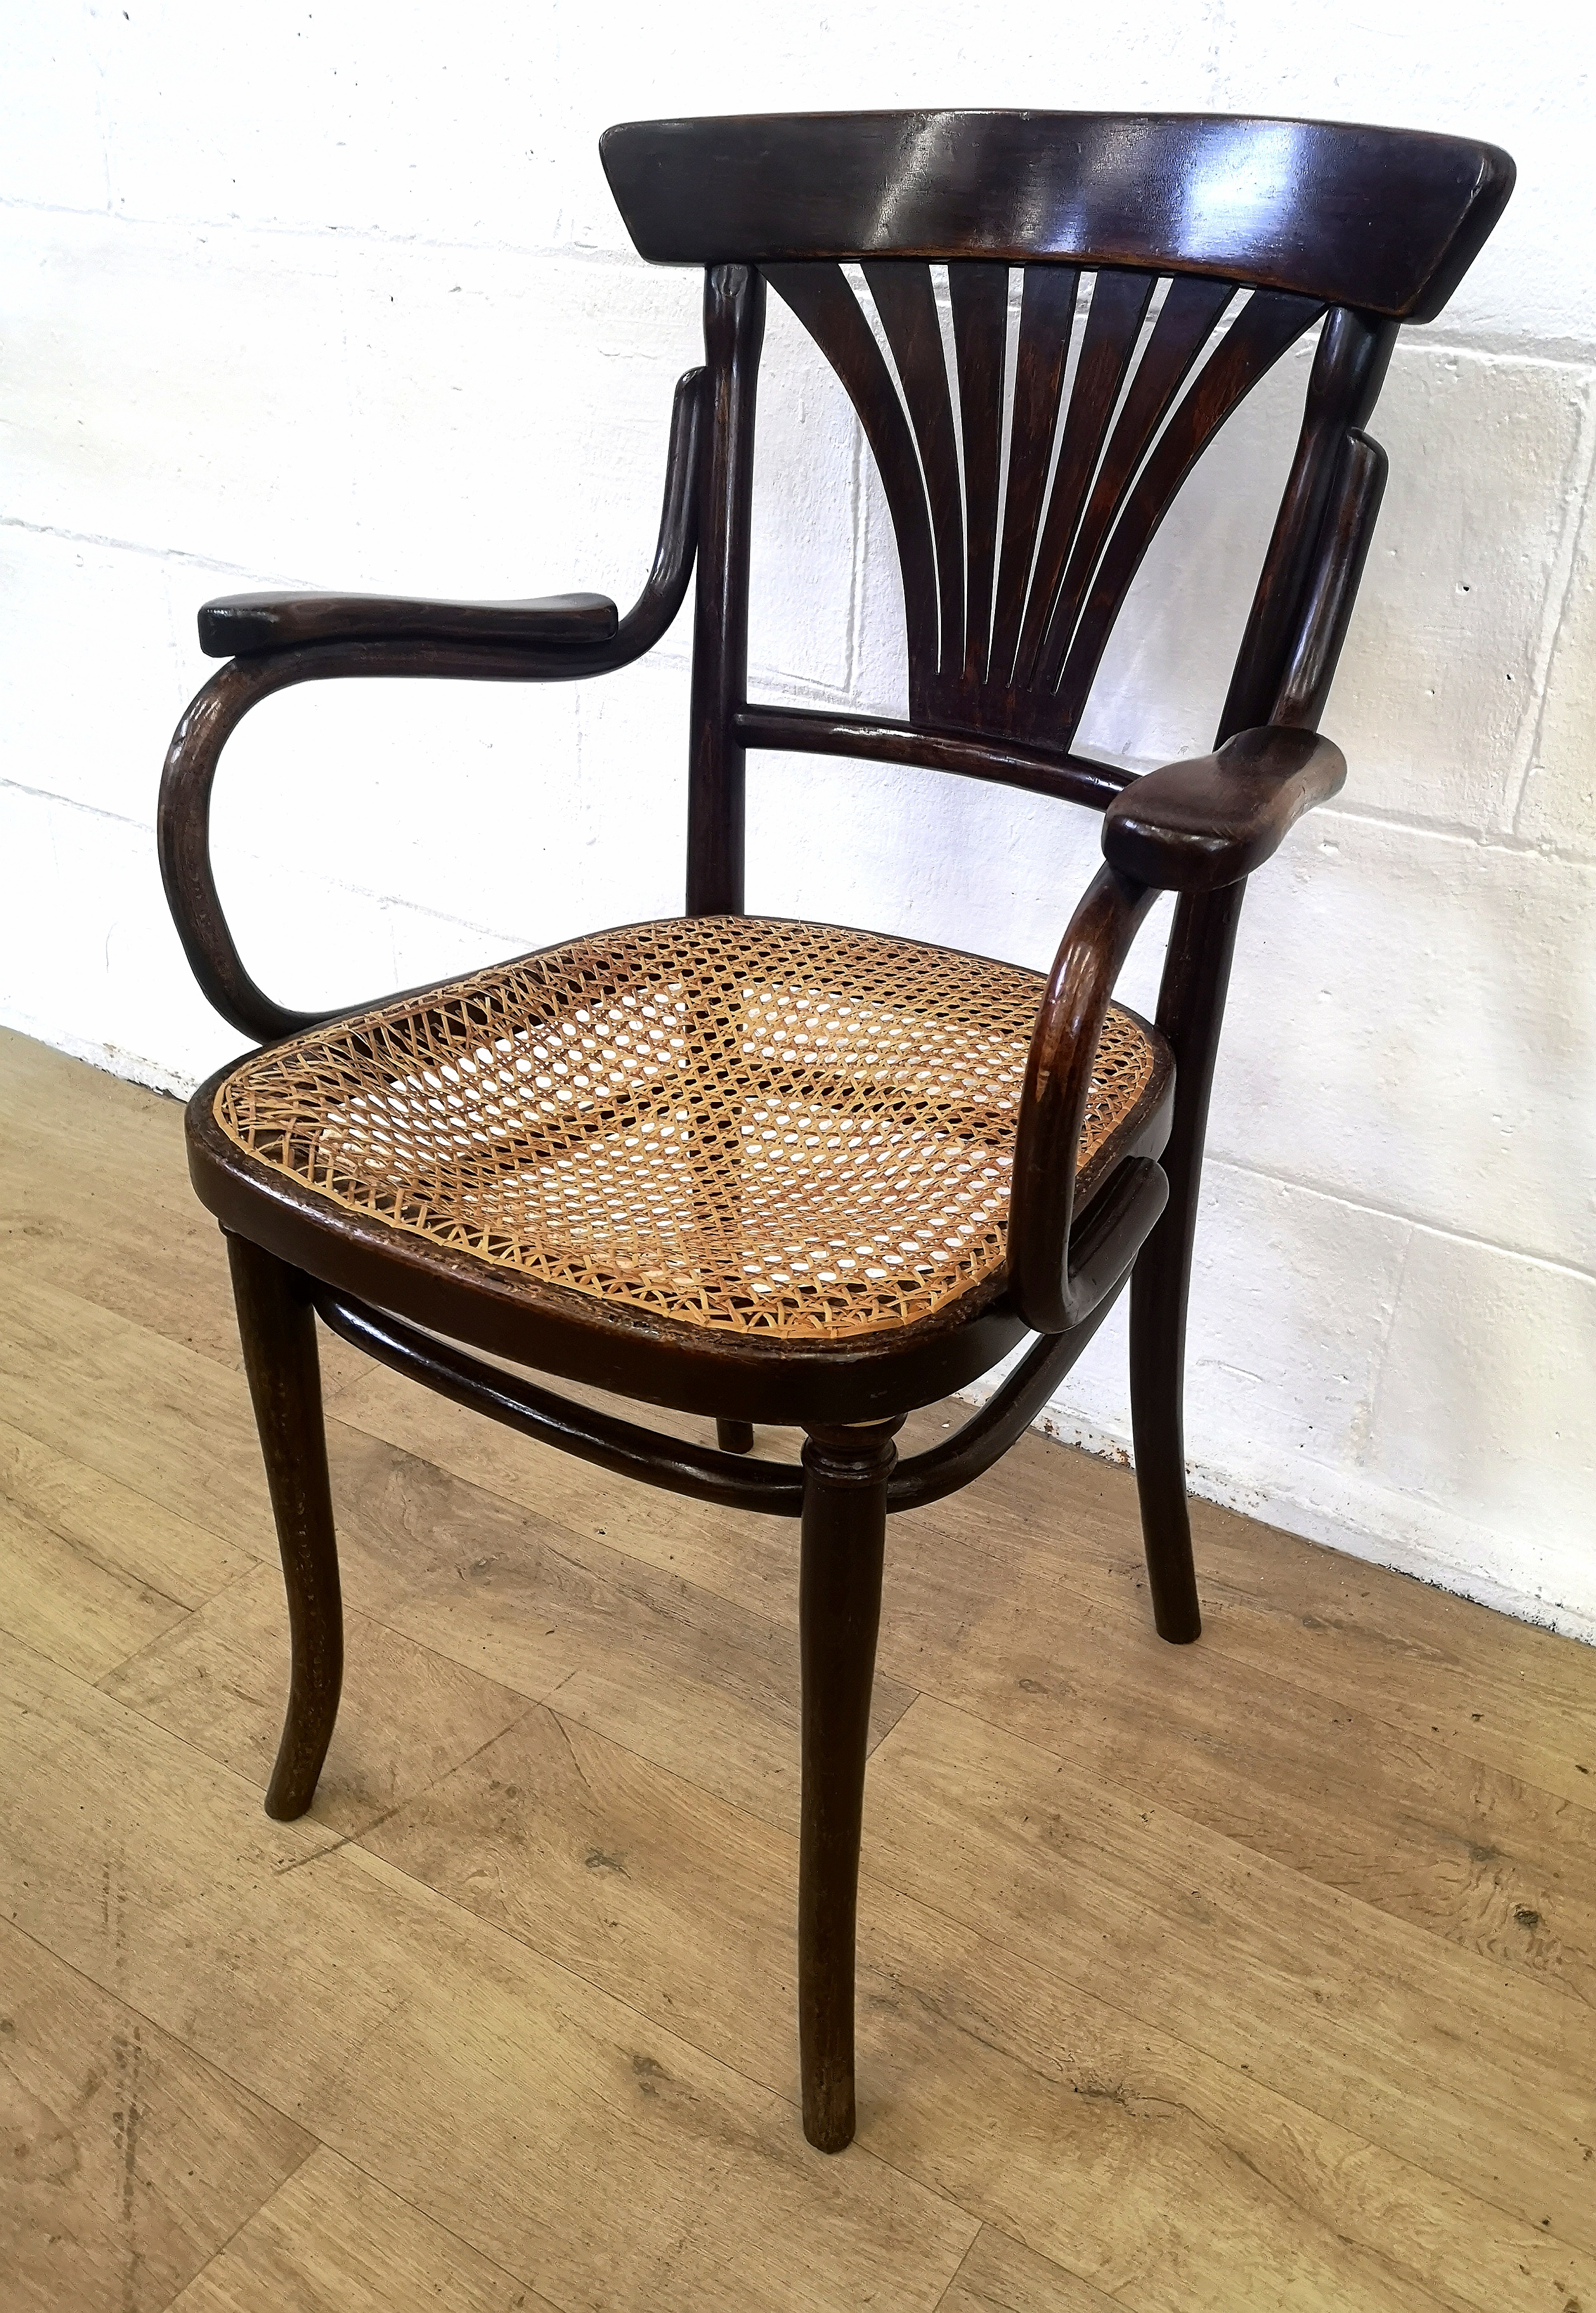 Pair of bentwood open armchairs - Image 4 of 5